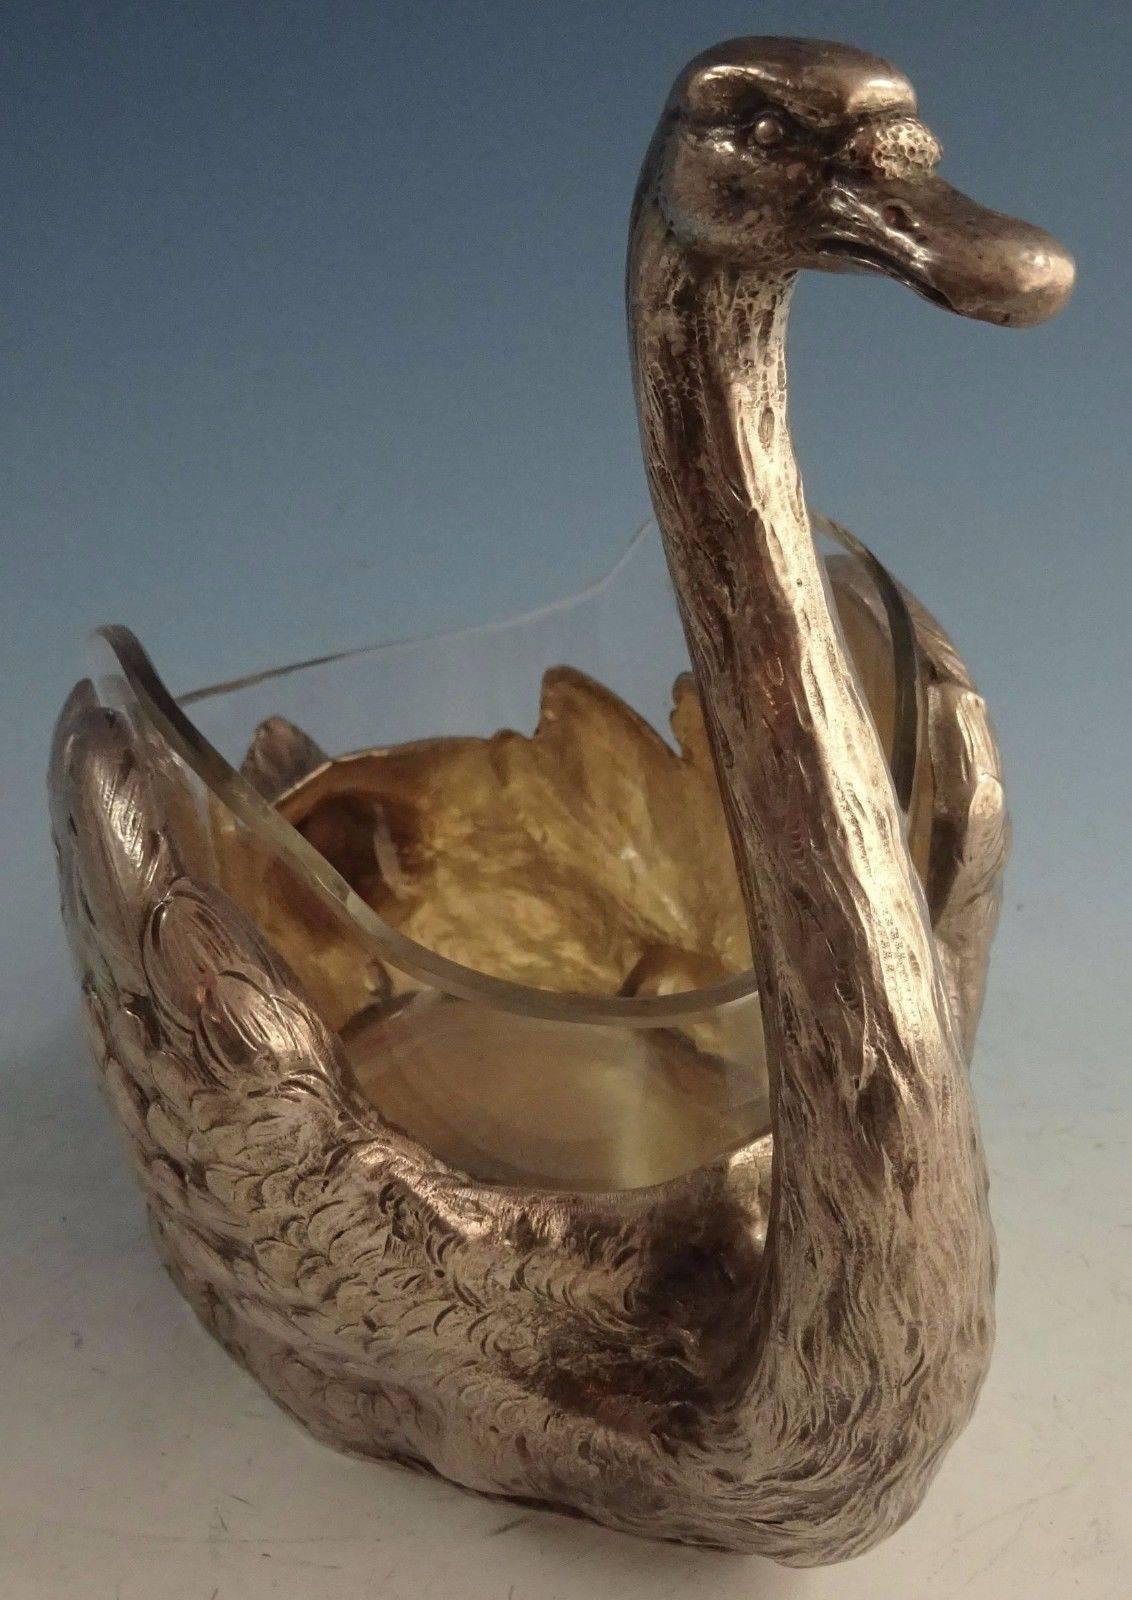 German 800 silver swan centrepiece with a glass insert. It measures 6 1/2